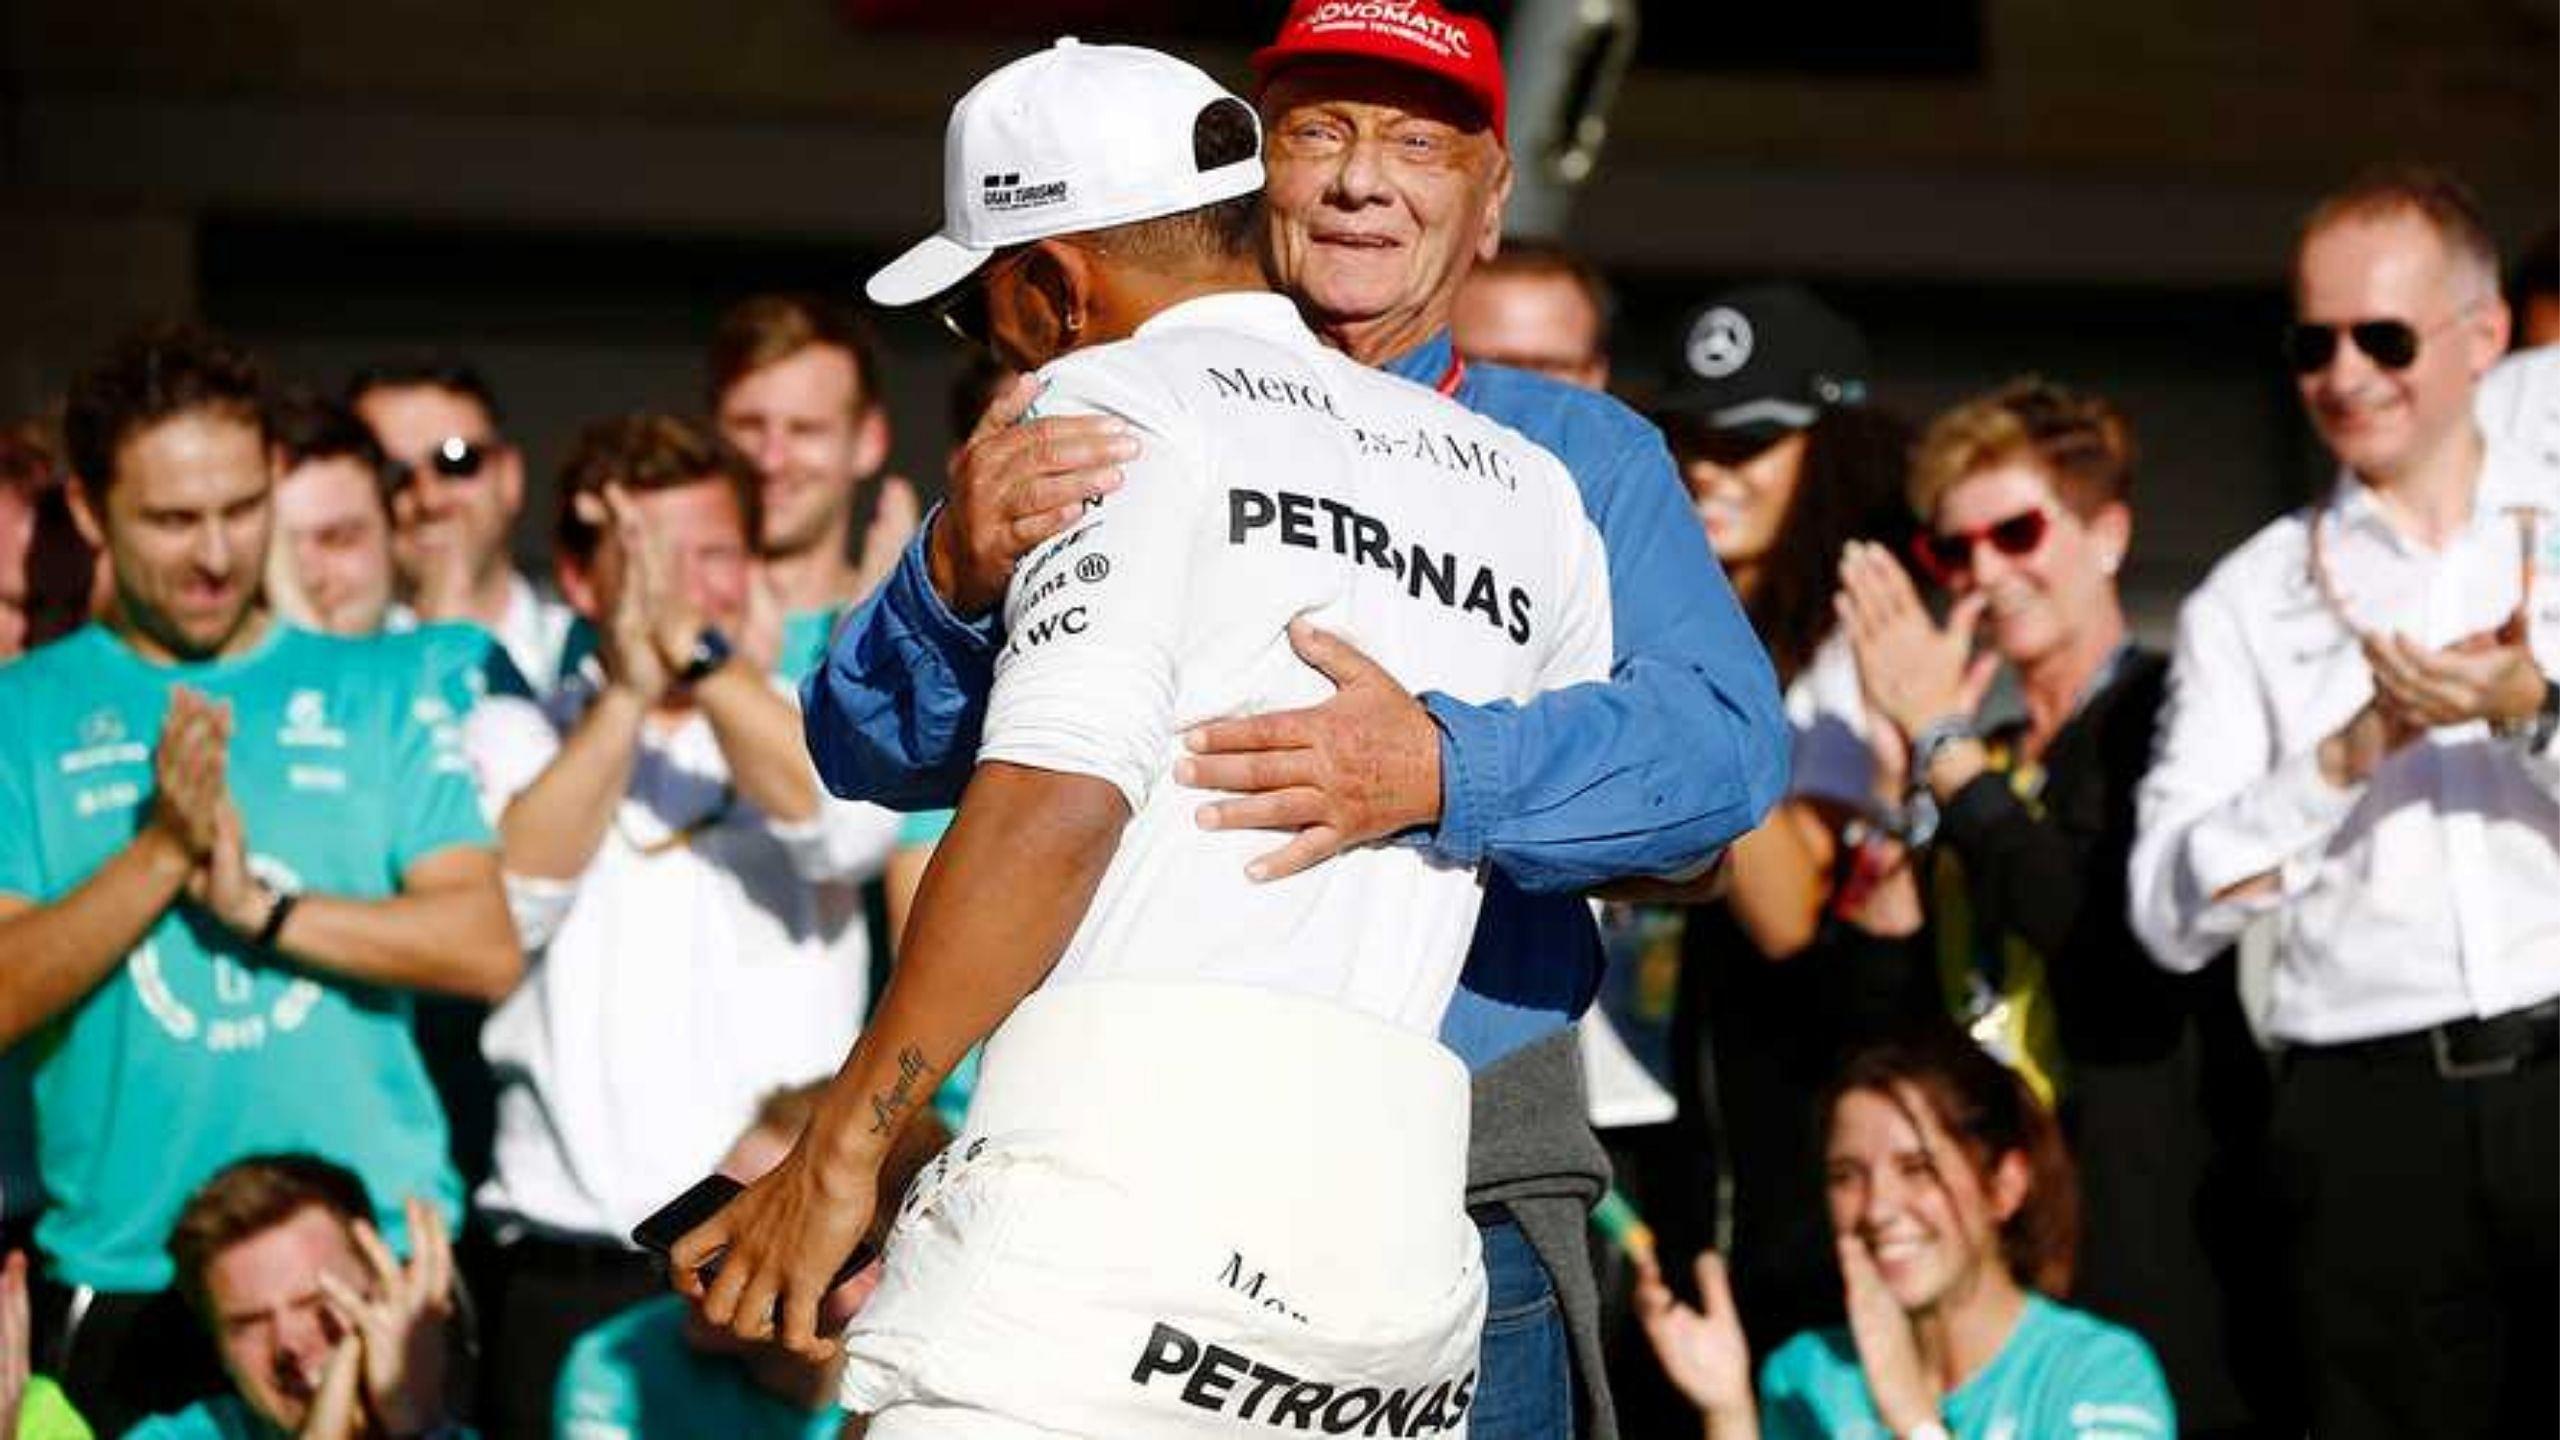 Lewis Hamilton sheds light on the role Ross Brawn and Niki Lauda played in convincing him to join Mercedes